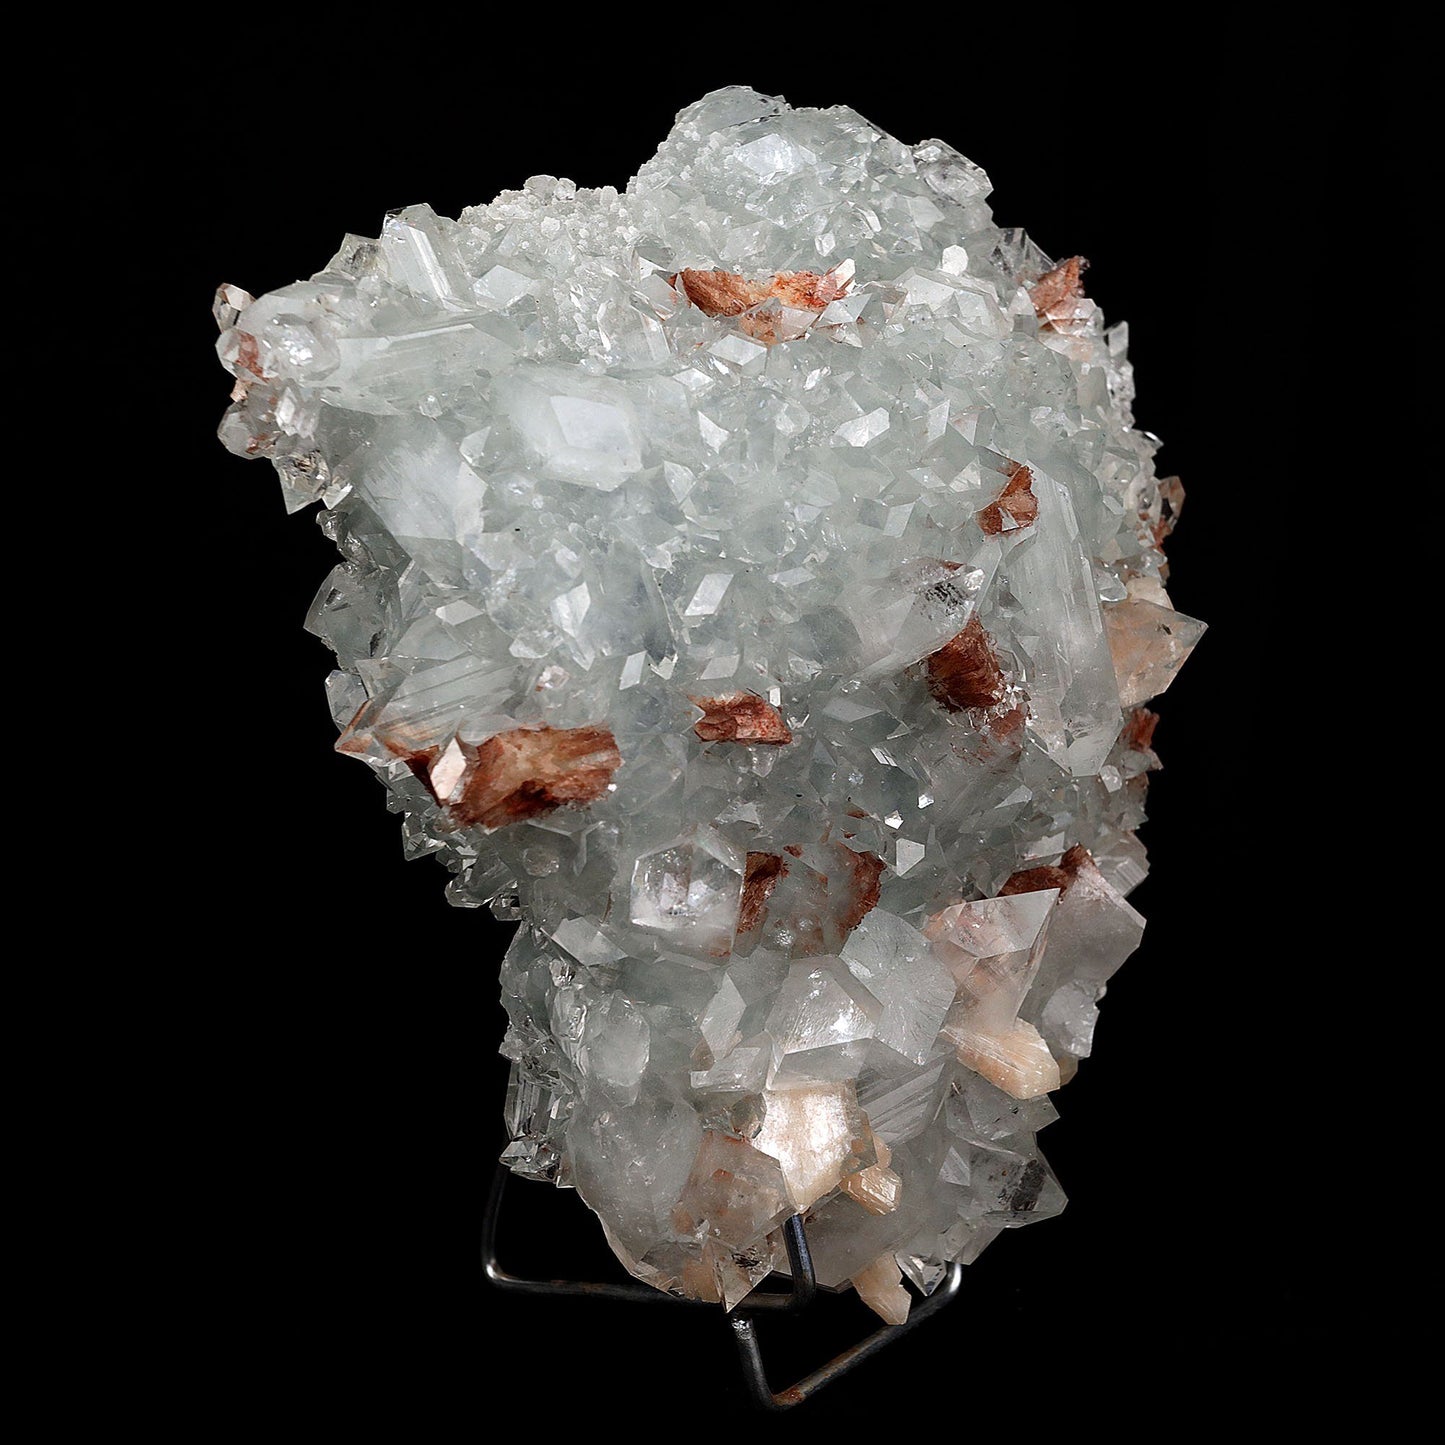 Apophyllite crystal with Stilbite & Heulandite Natural Mineral Specime…  https://www.superbminerals.us/products/apophyllite-crystal-with-stilbite-heulandite-natural-mineral-specimen-b-3721  Features:This large plate is covered with exceptional Stilbite and Apophyllite crystals. The contrast between the pearly Stilbite and the glassy, transparent Apophyllite crystals is eye-catching, and the entire piece sparkles. A great piece, no damage. Primary Mineral(s): Apophyllite Secondary Mineral(s): Stilbite